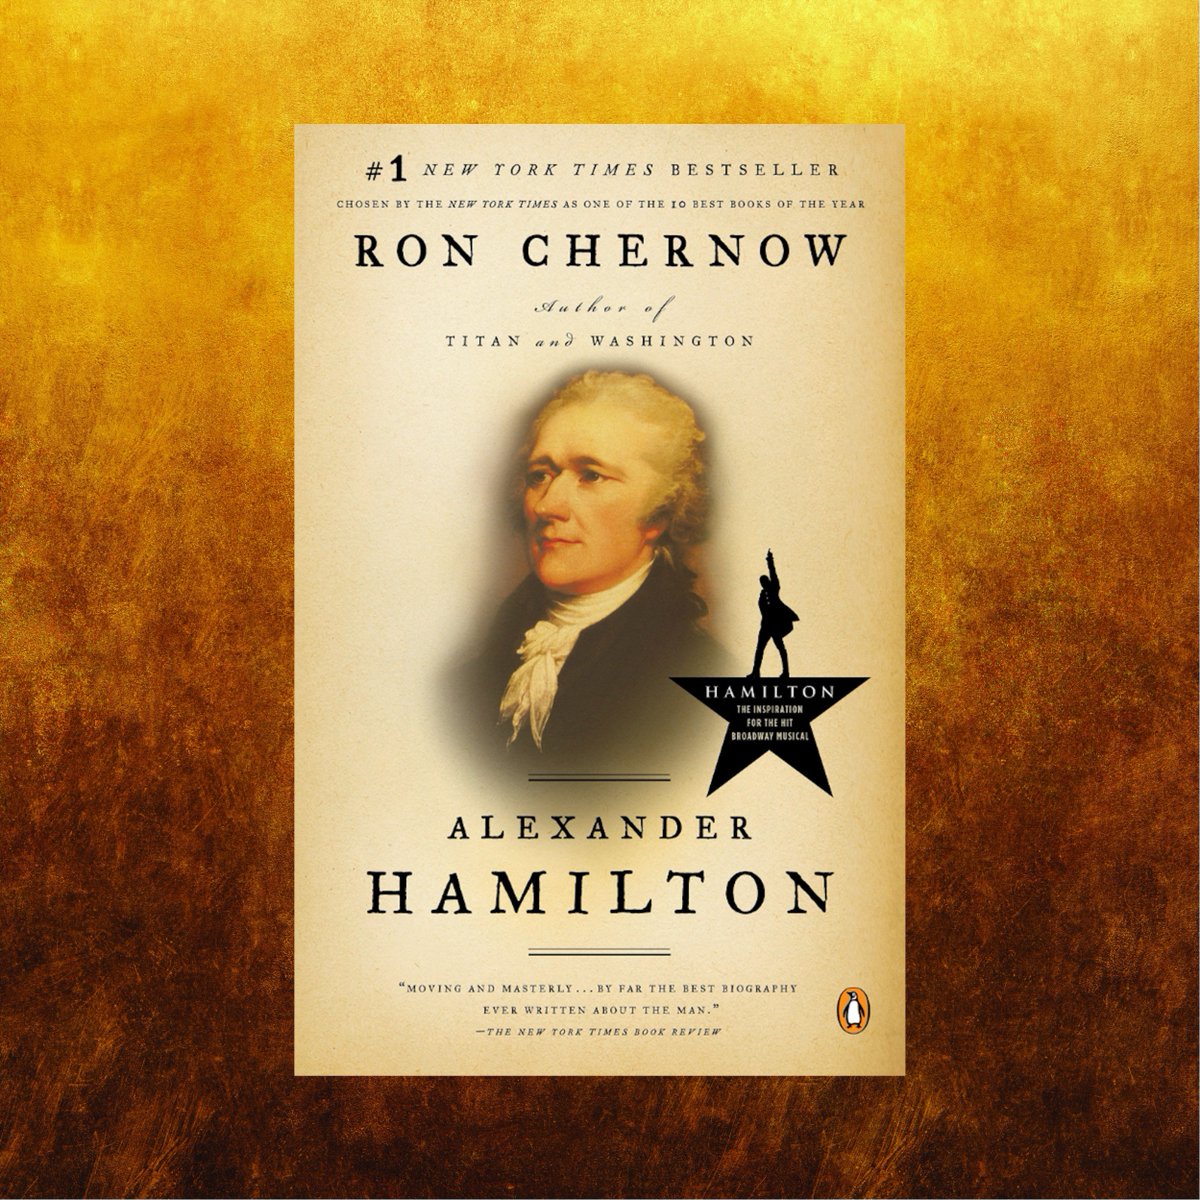 Happy #WorldBookDay! 📖 While @HamiltonMusical is based on real historical events, #DidYouKnow that Lin-Manuel Miranda was famously inspired to write the musical after reading a copy of Ron Chernow's 2004 biography of Alexander Hamilton?